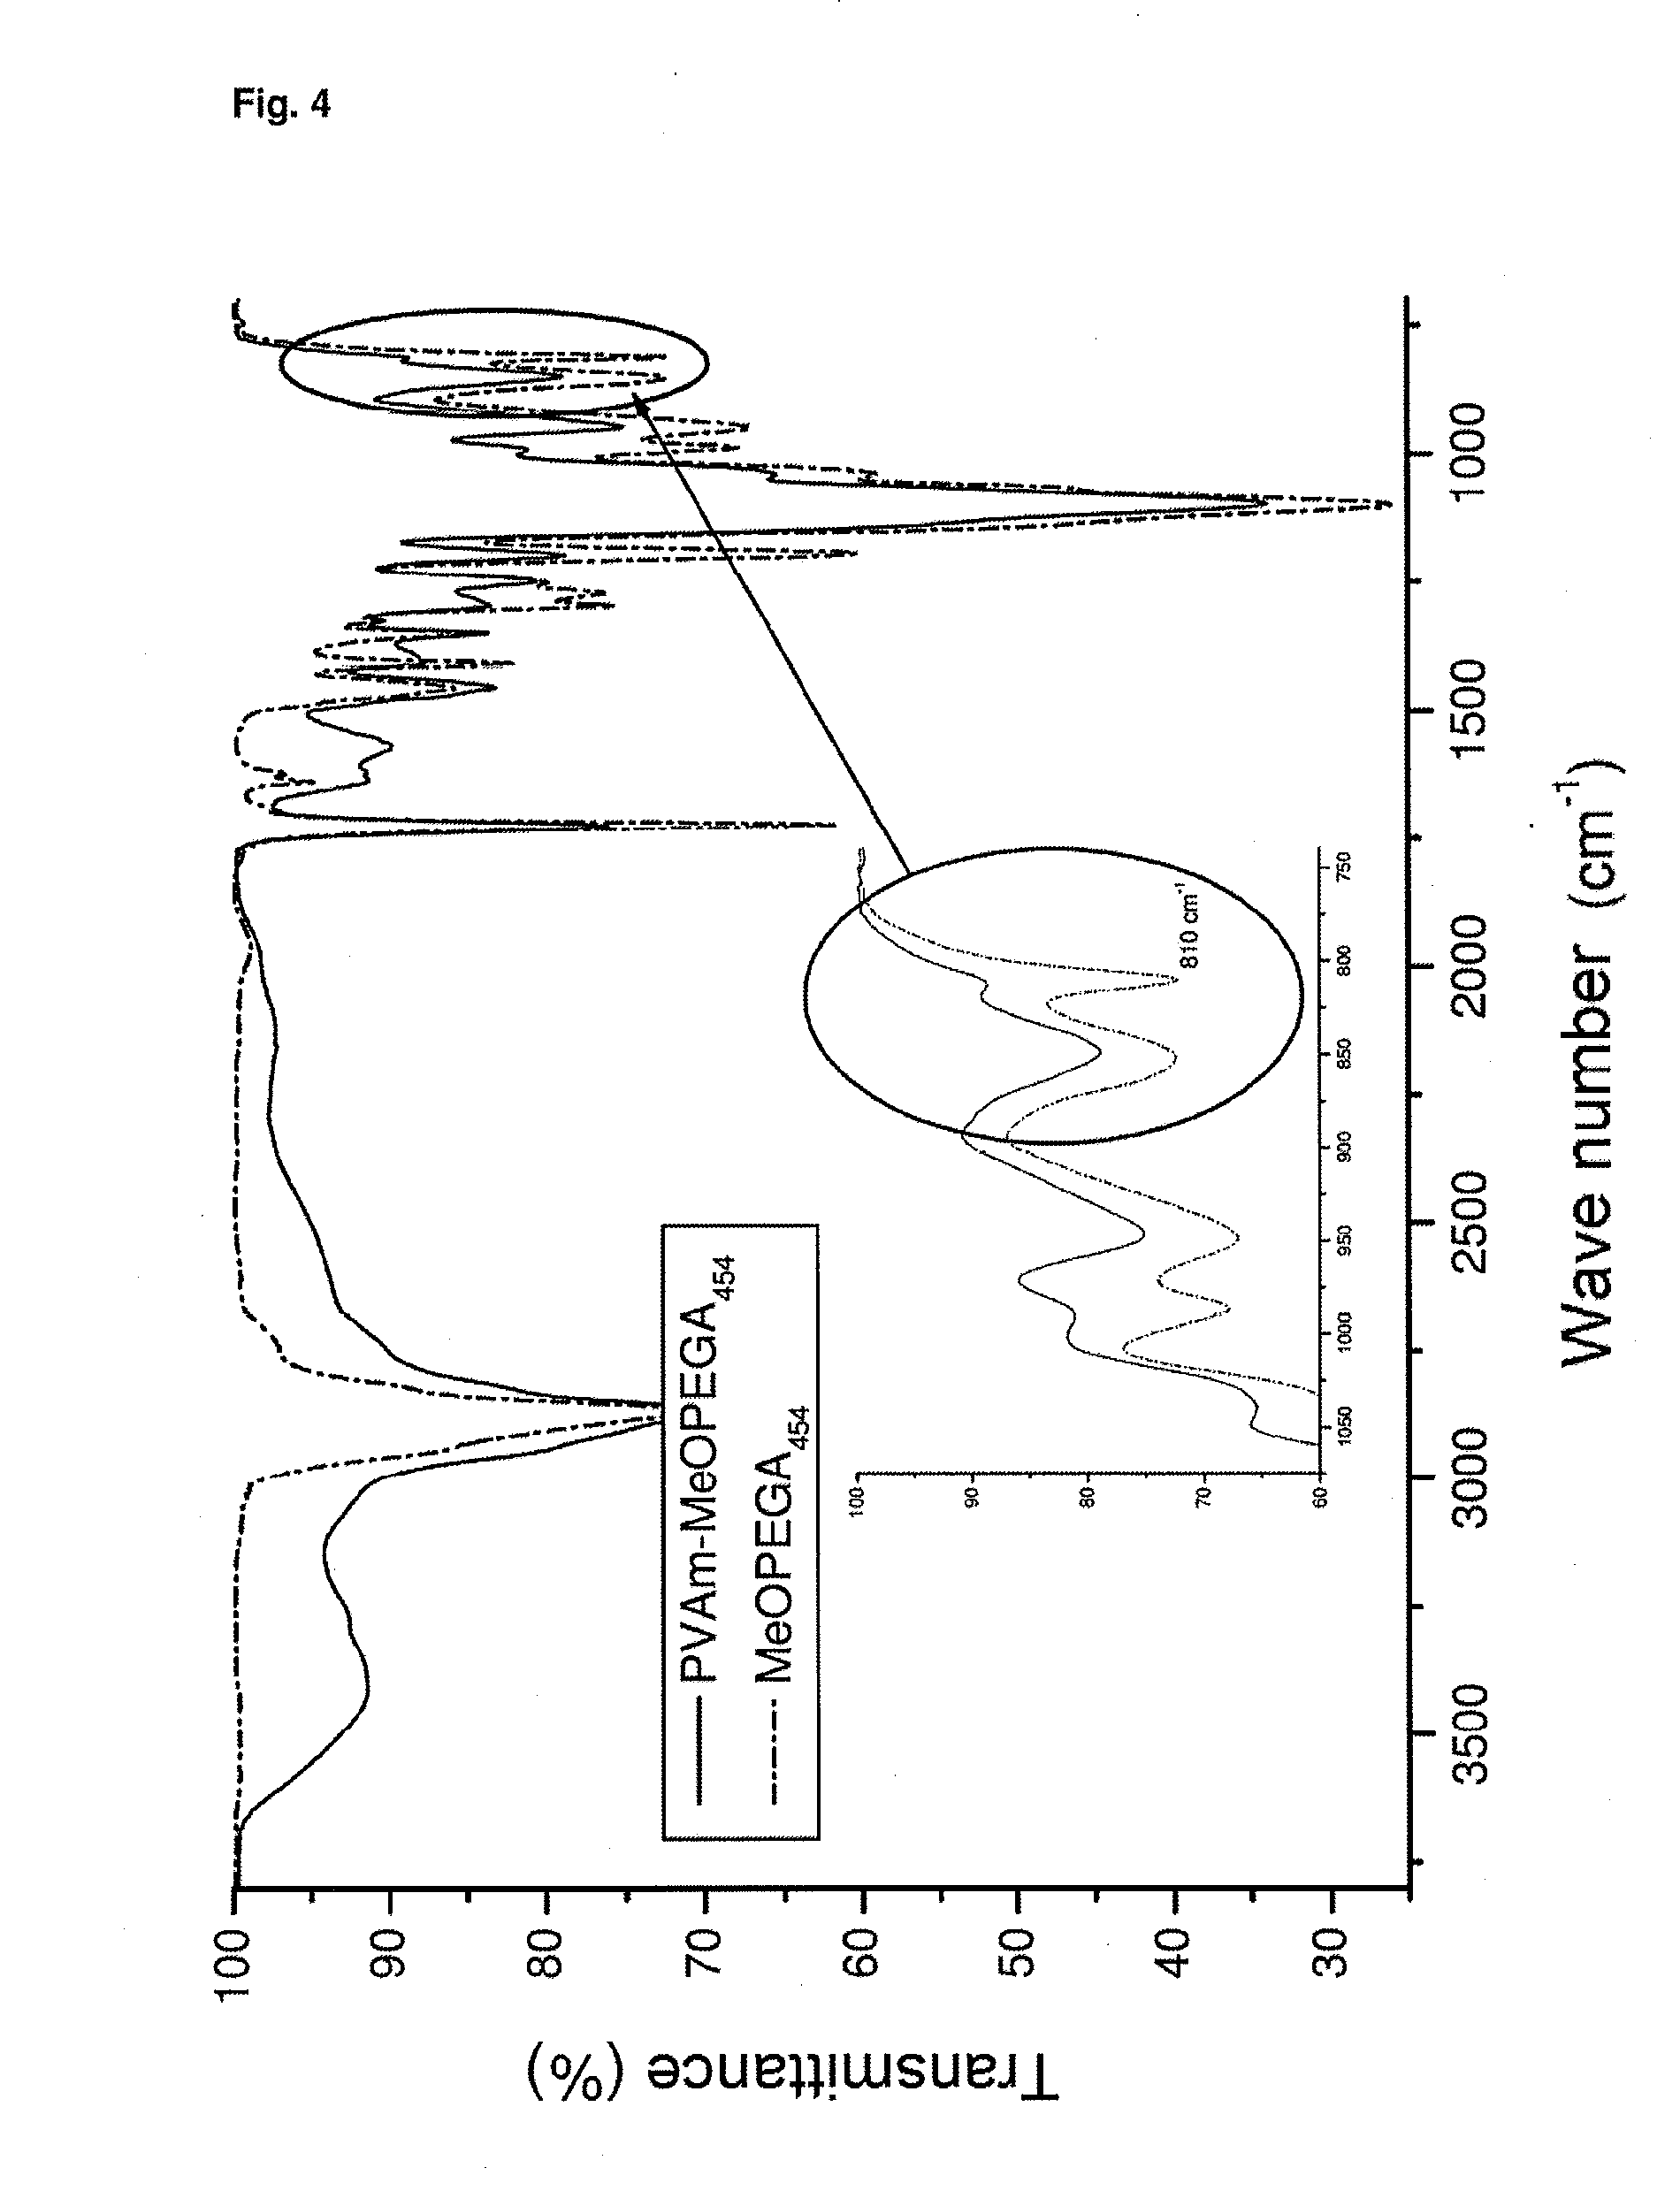 Method for coating and functionalizing nanoparticles by means of a michael reaction